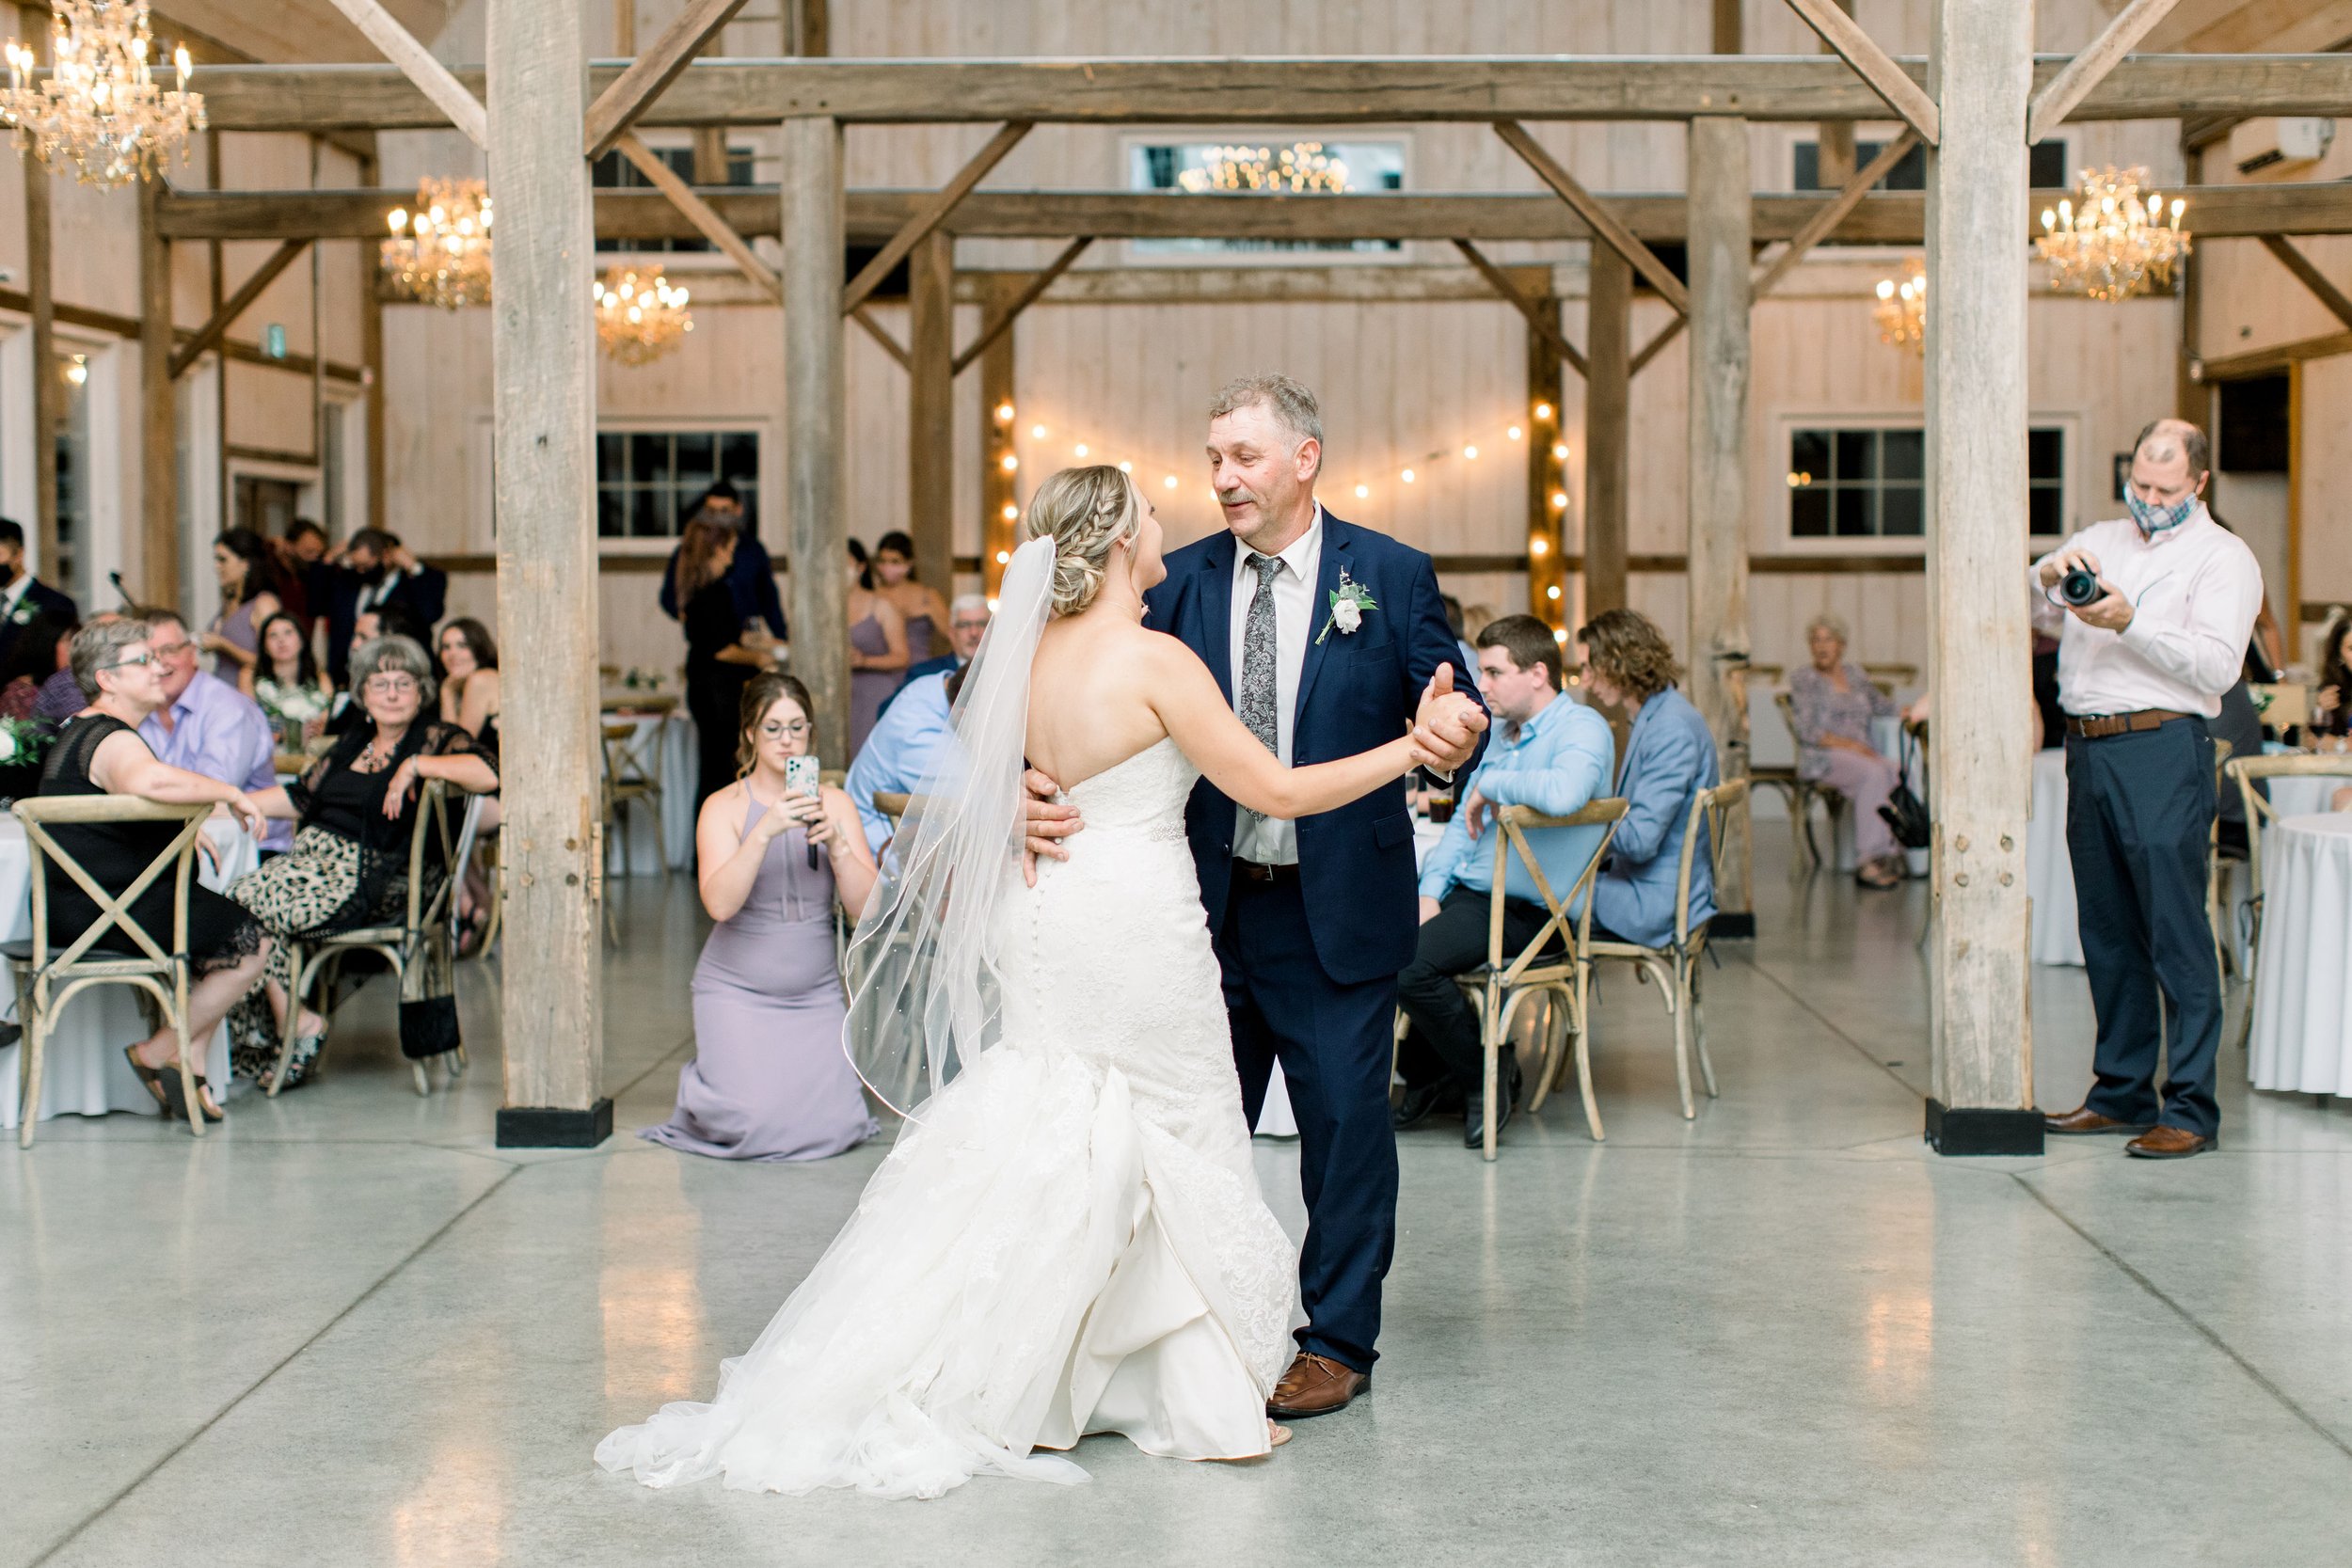  Bride dances with her father on her wedding night at Stonefield Estates, Ontario by Chelsea Mason Photography. daddy daughter dance #StonefieldEstates #Ontarioweddings #Chelseamasonphotography #Chelseamasonengagements #Ontarioweddingphotographers 